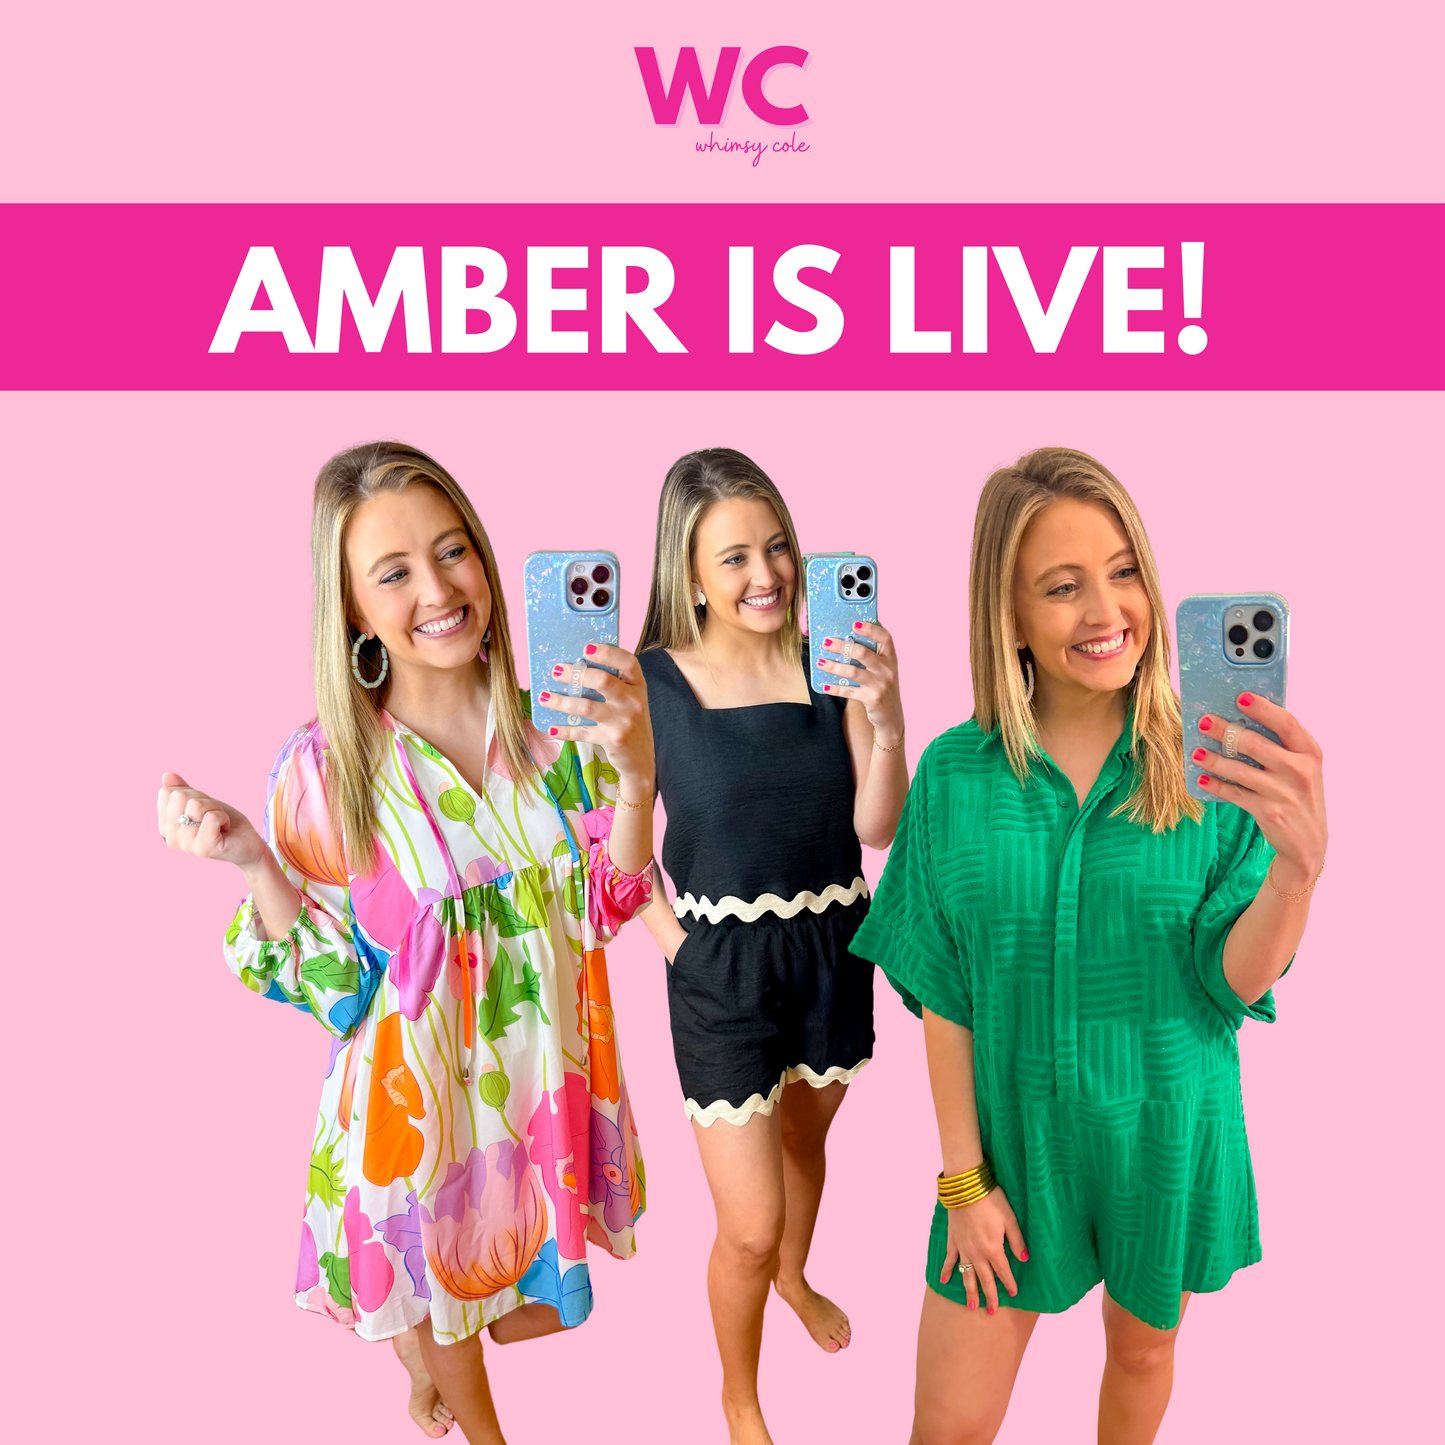 AMBER IS LIVE!